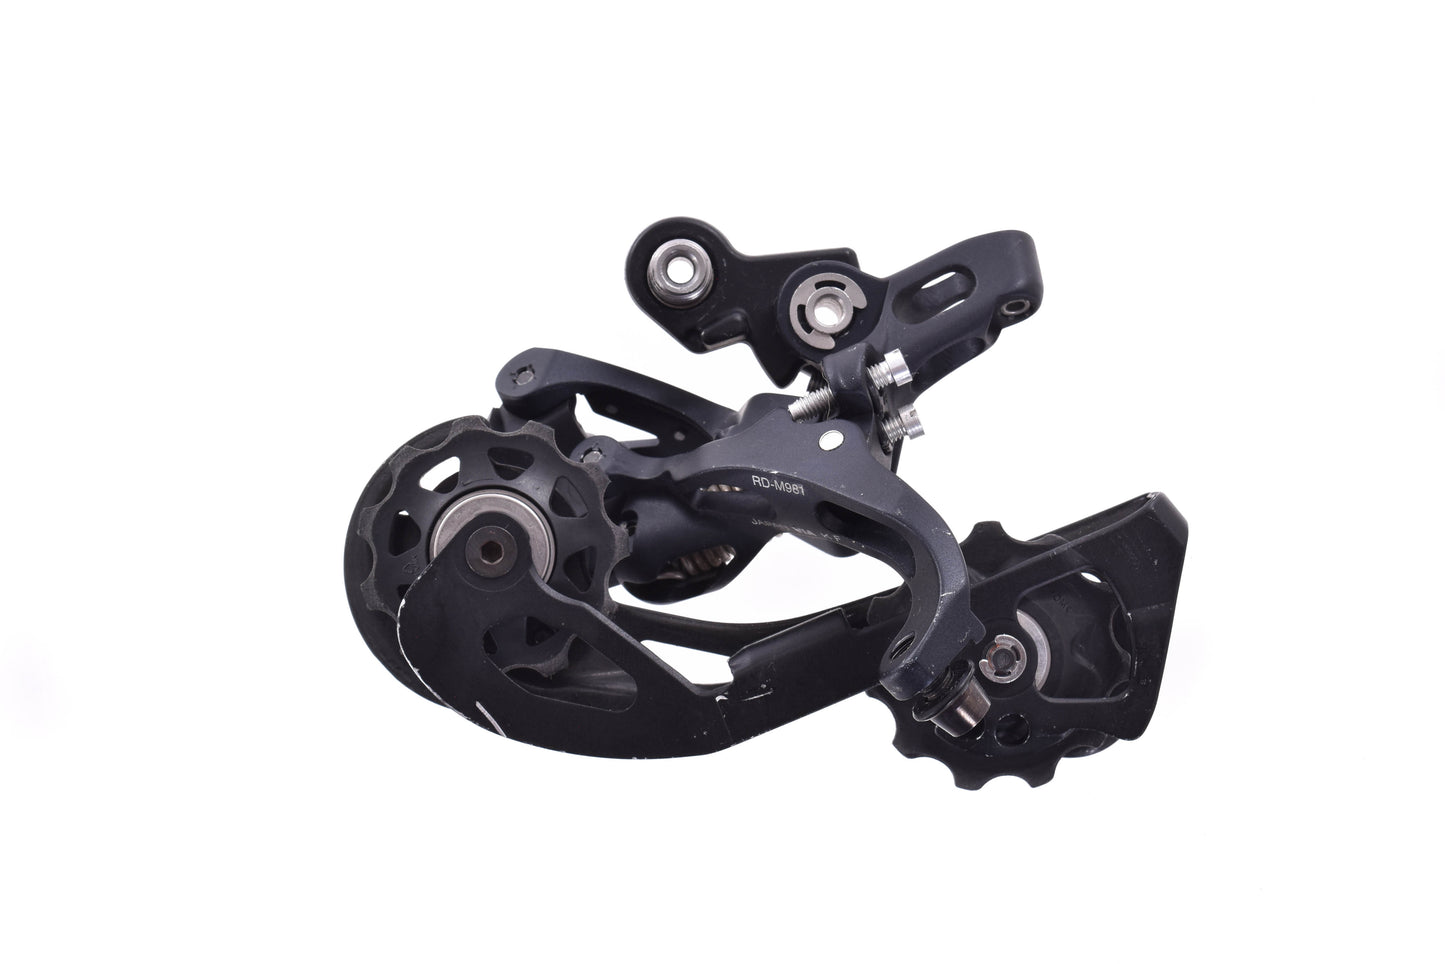 USED Shimano XTR RD-M981 10 speed Rear Derailleur Carbon Cage